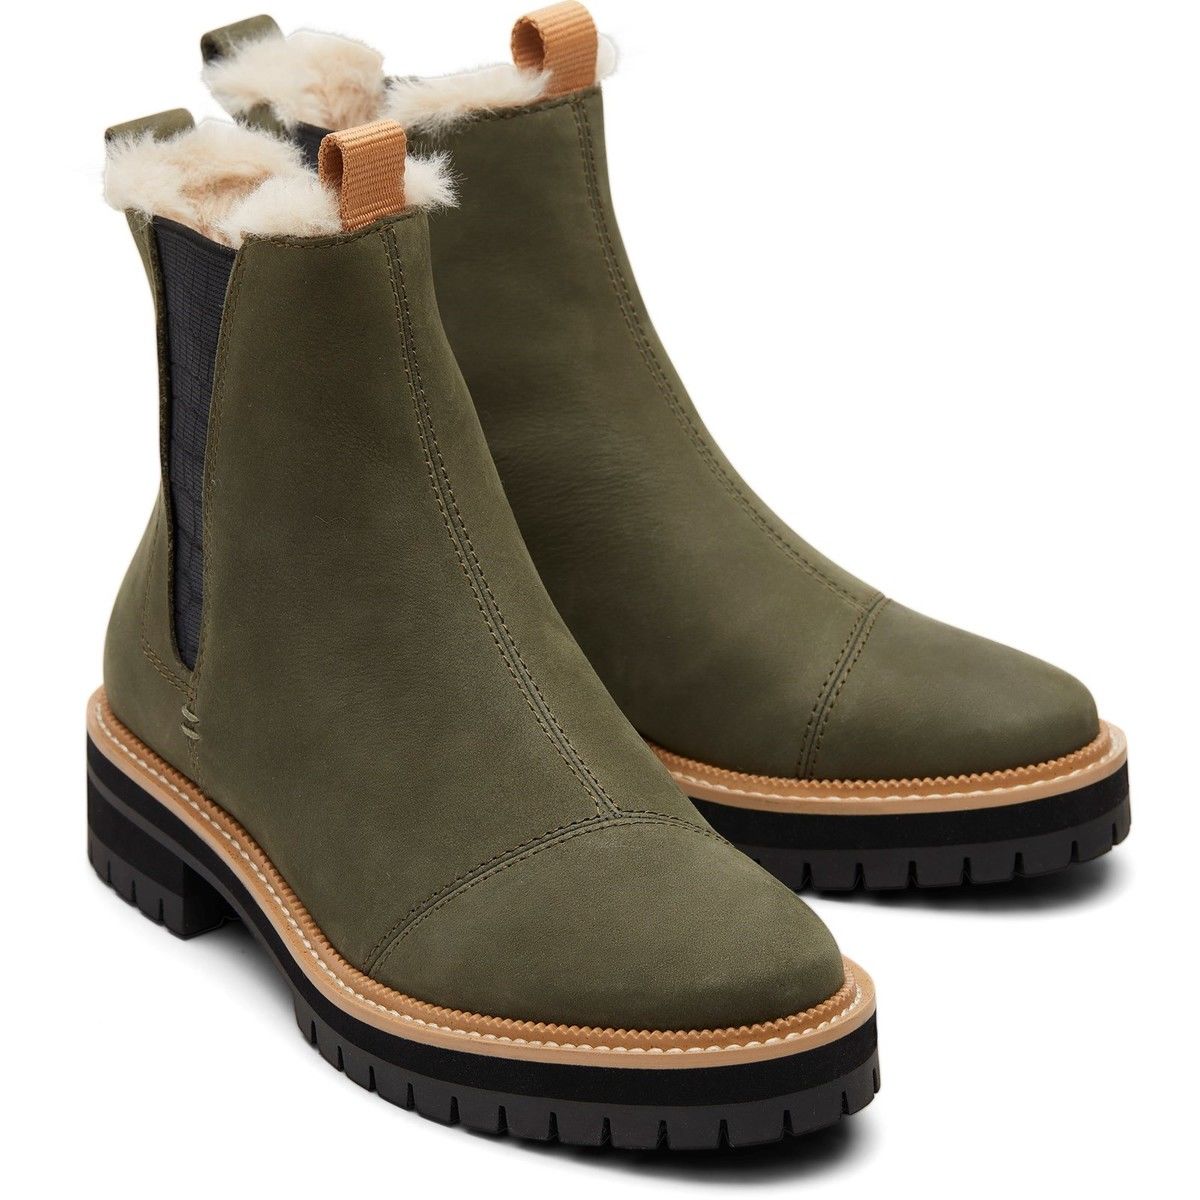 Toms Dakota Olive Green Womens ankle boots 10016854 in a Plain Leather in Size 5